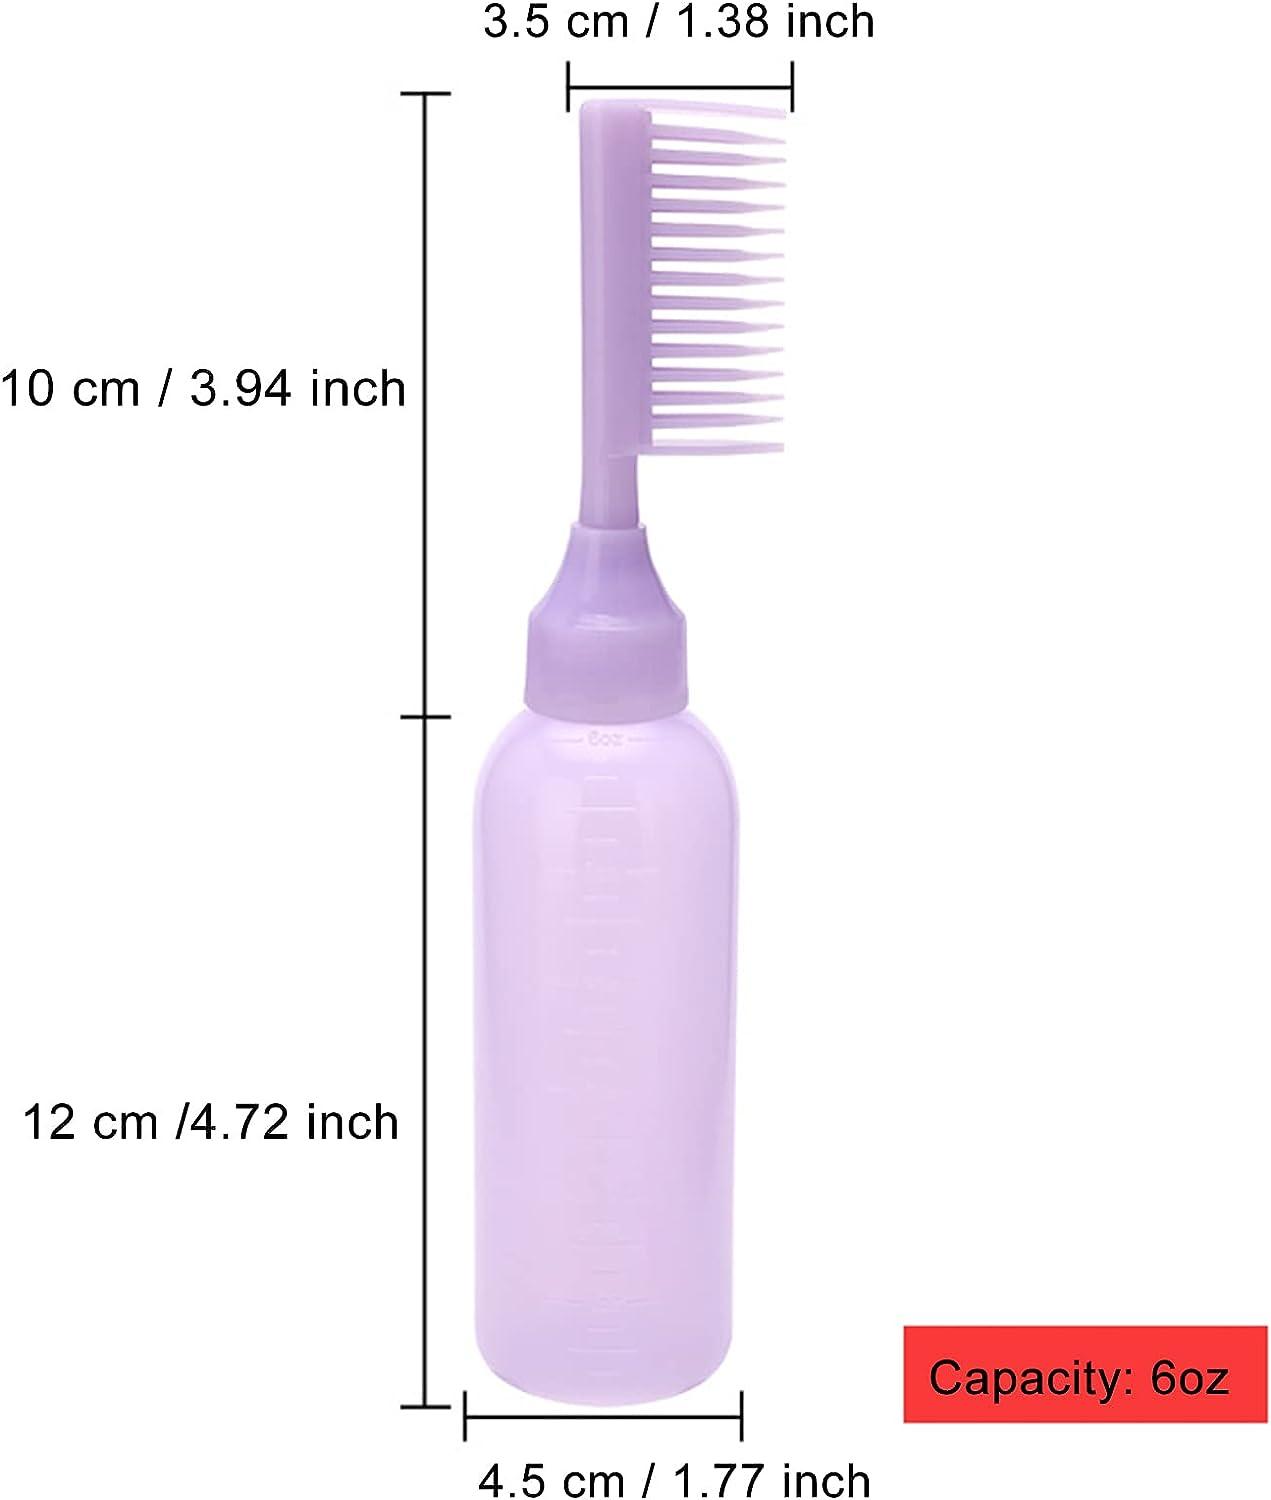 FrgKbTm Root Comb Applicator Bottle, 3pcs 6oz Hair Color Applicator Bottles  With Comb and Graduated Scale Hair Dye Bottle For Hair Oil Salon Care